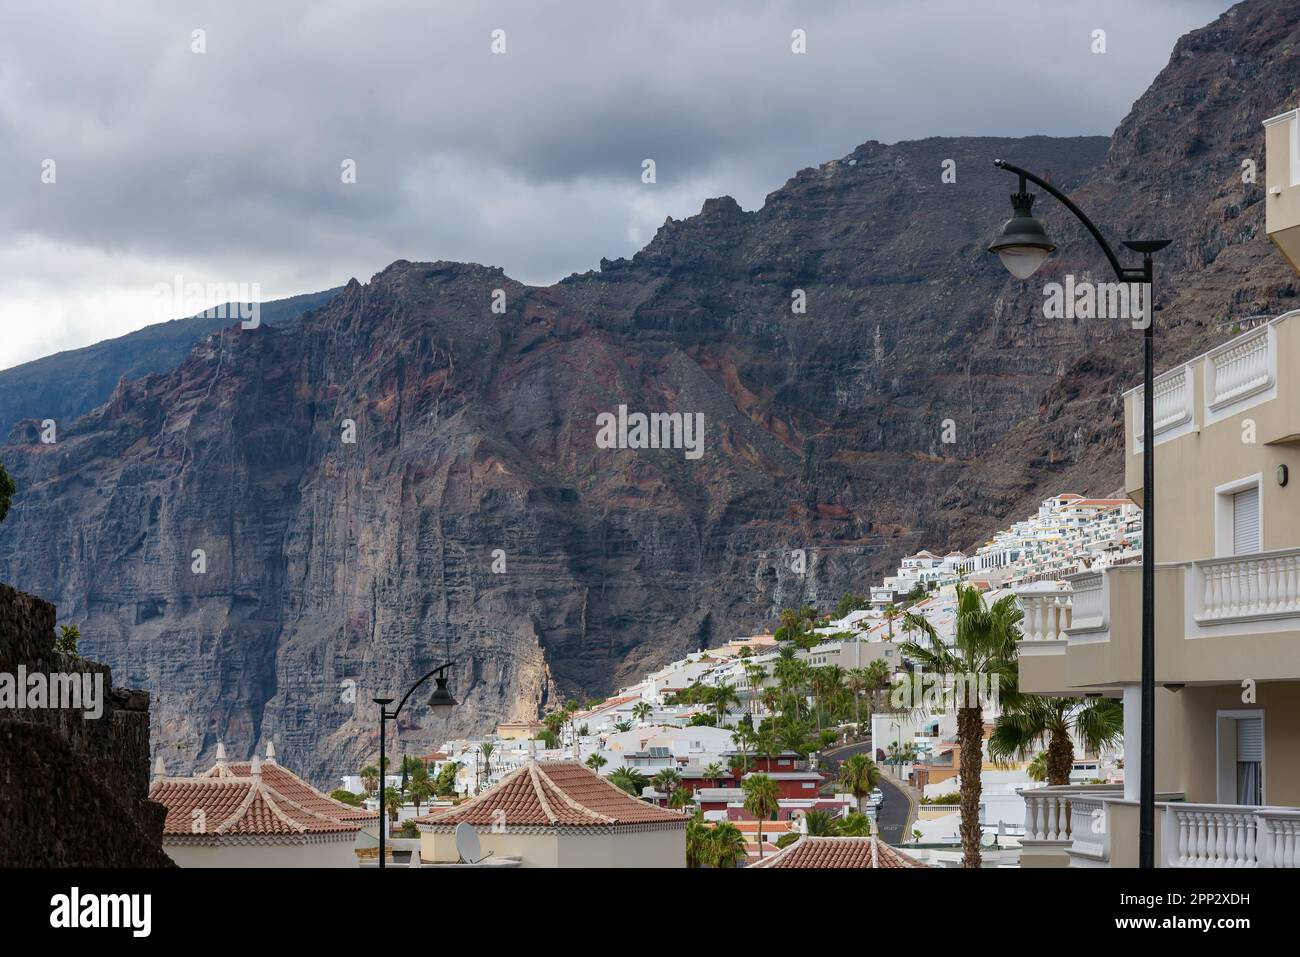 Los Gigantes town at the foot of the cliffs, Tenerife, Canary Islands, Spain Stock Photo